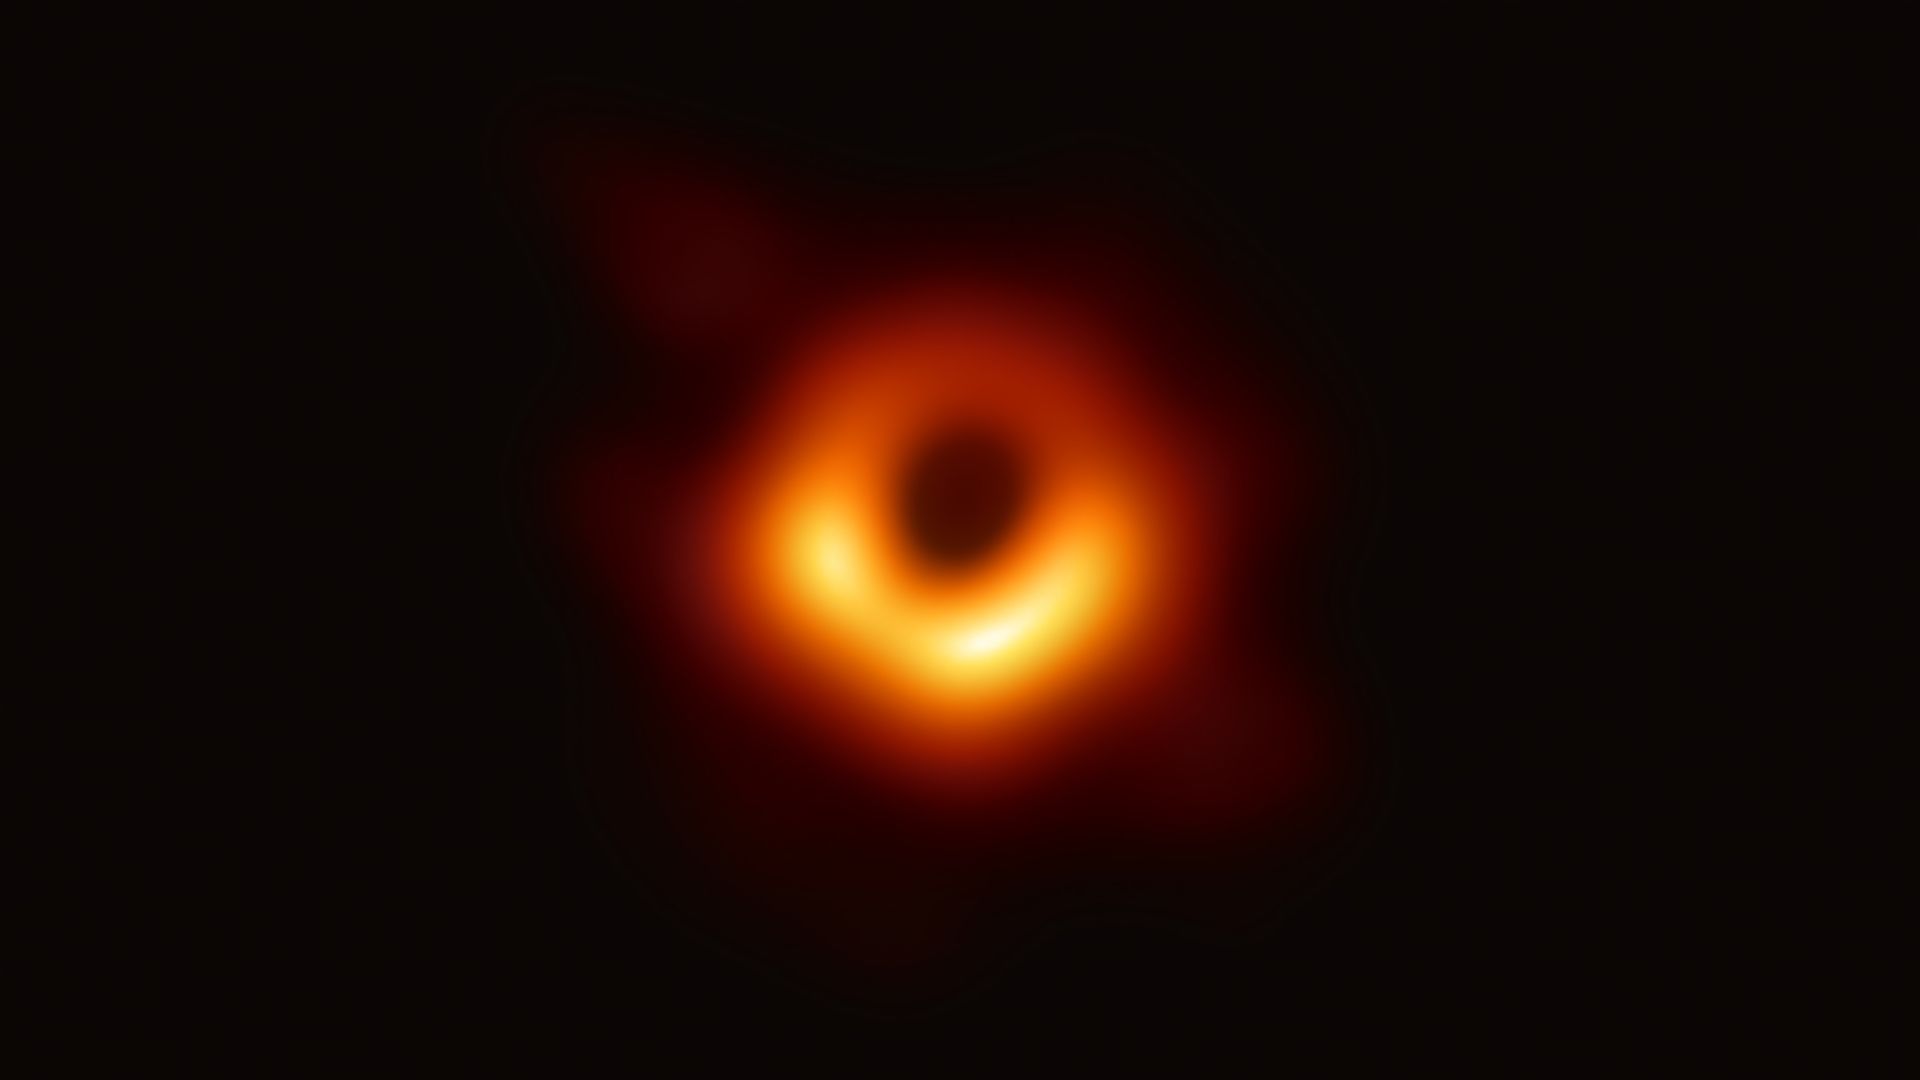 First-ever image of a black hole